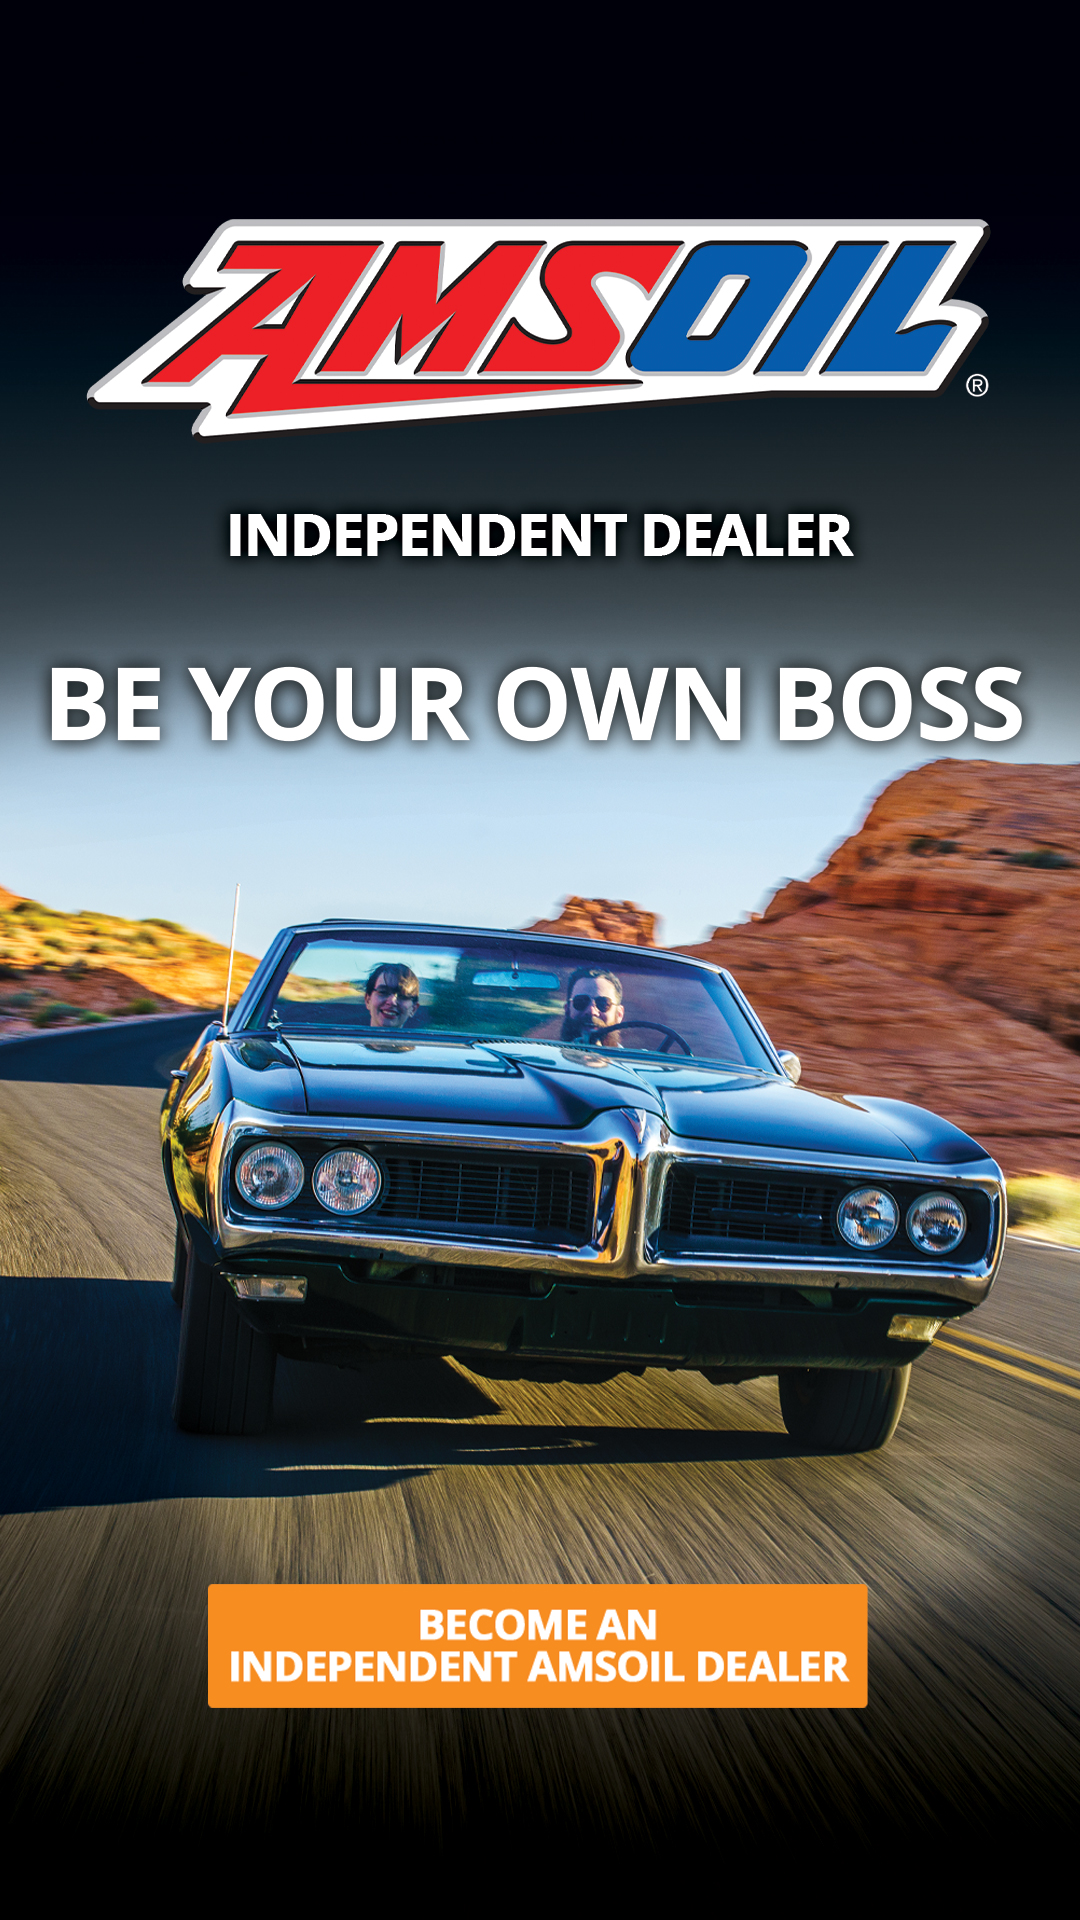 Be your own boss by becoming an AMSOIL Dealer!